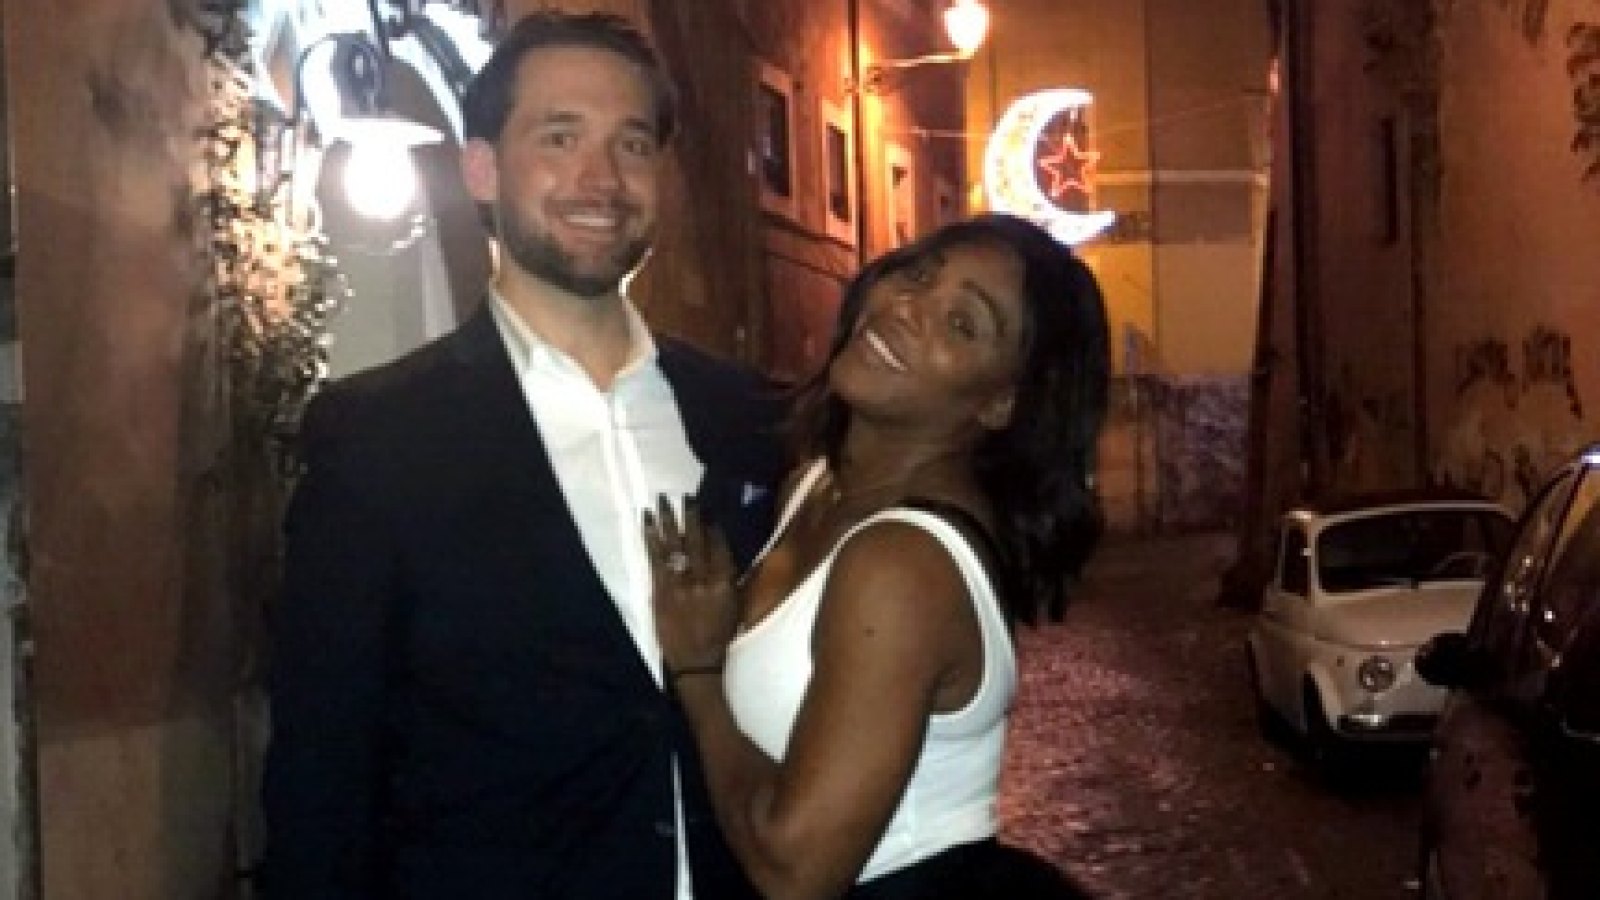 Serena Williams Shows Off Huge Engagement Ring in New Pic